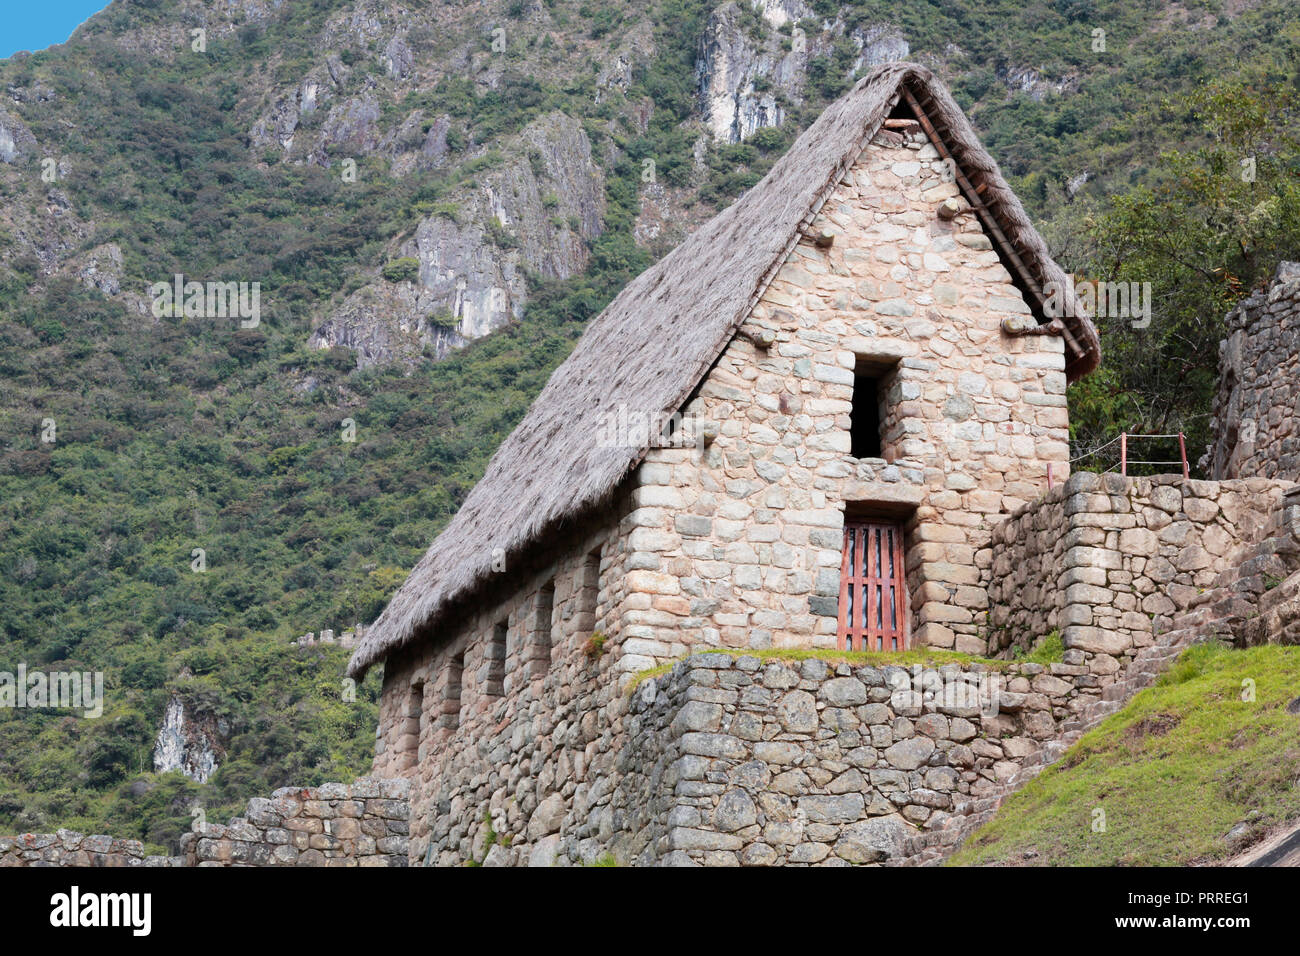 Inca stone structure with thatched roof Stock Photo